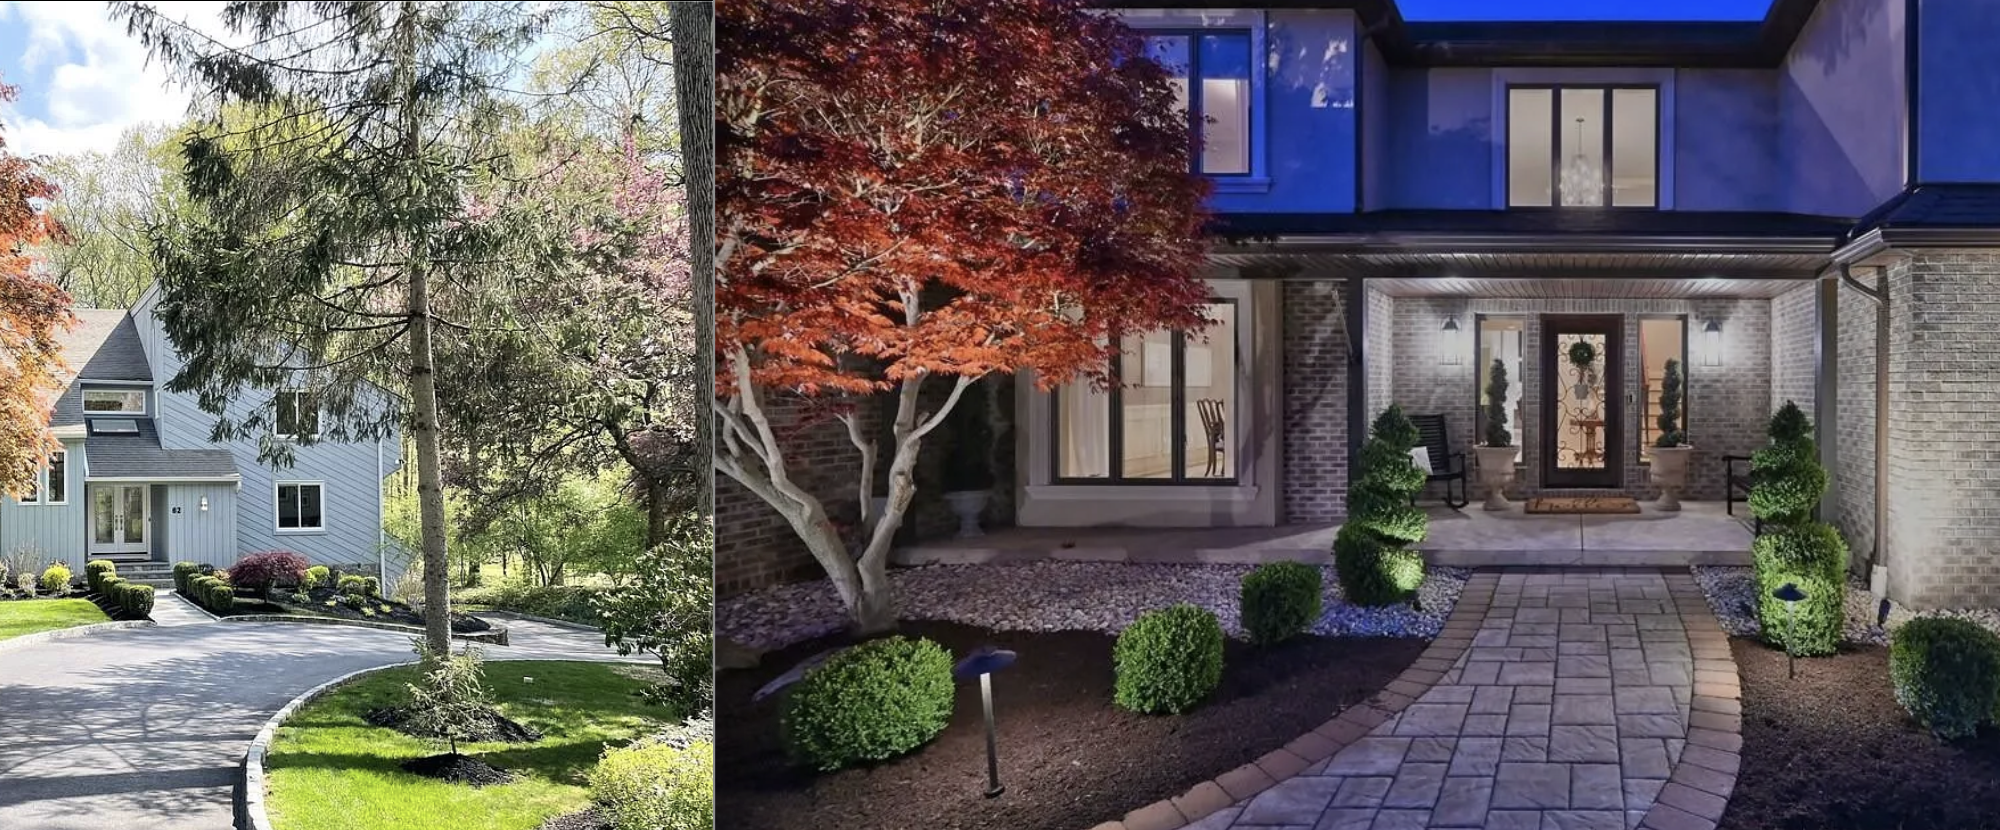 The left image is a photo of my old house in Chappaqua and the right image is a photo of my new house in Moosic Pennsylvania